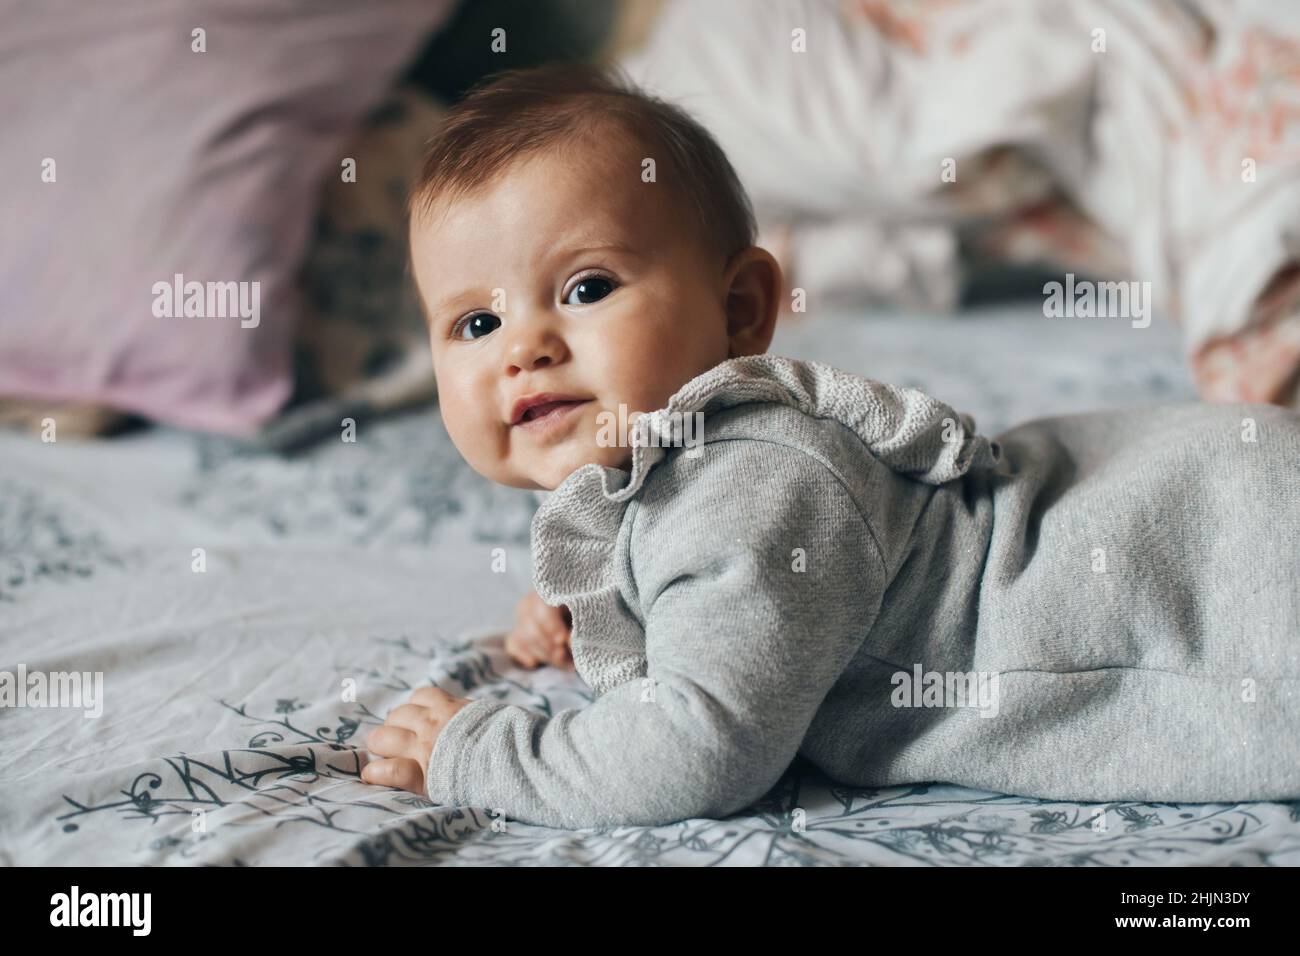 Caucasian baby girl wearing bodysuit crawling on bed while looking at camera. Beautiful closeup portrait. Stock Photo